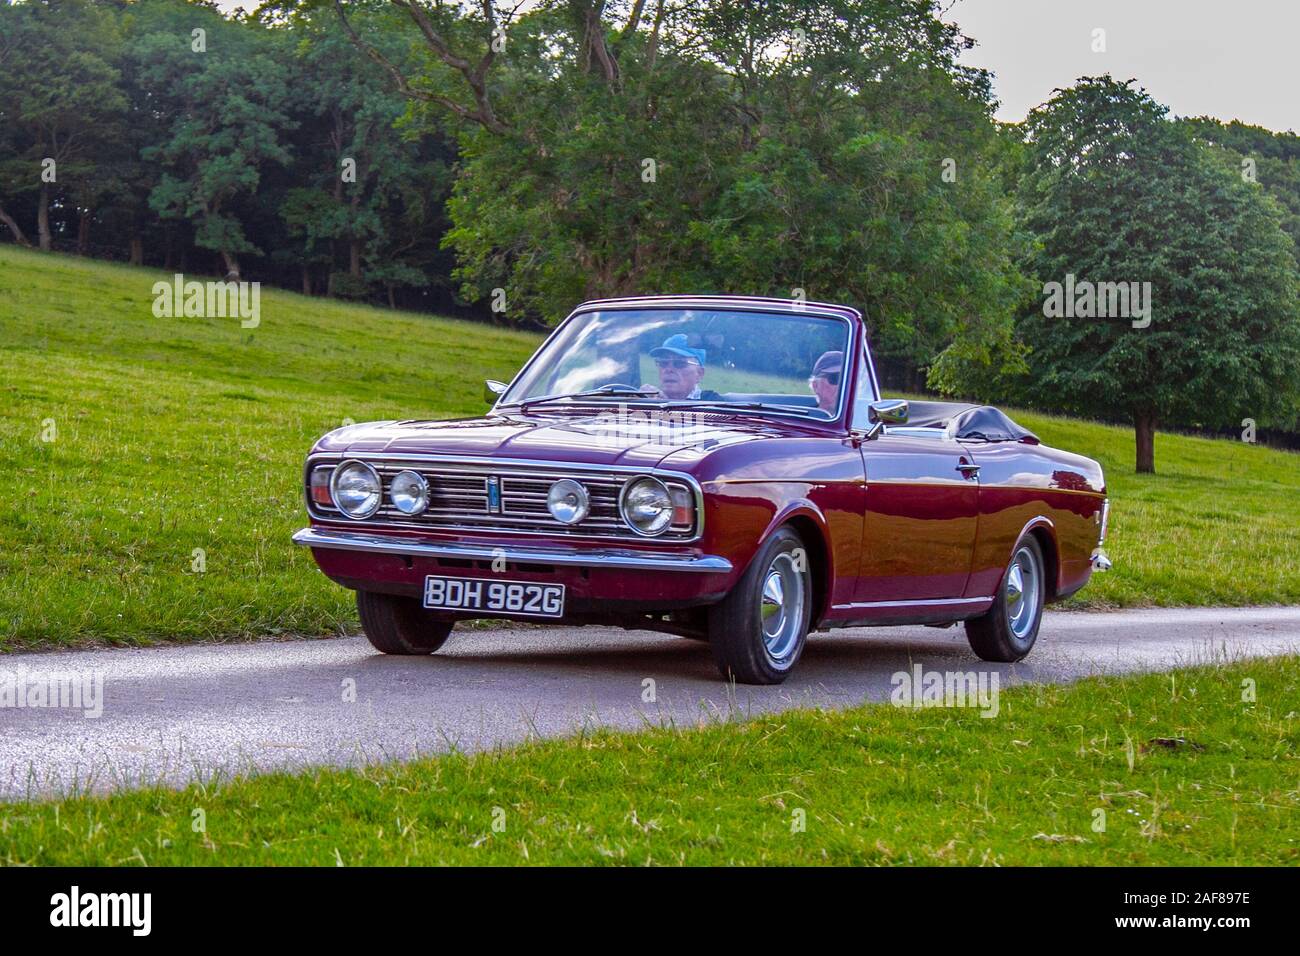 1969 60s maroon Ford Cortina 1600 GT;  Classic cars, historics, cherished, old timers, collectable restored vintage veteran, heritage vehicles of yesteryear arriving for the Mark Woodward historical motoring event at Leighton Hall, Carnforth, UK Stock Photo